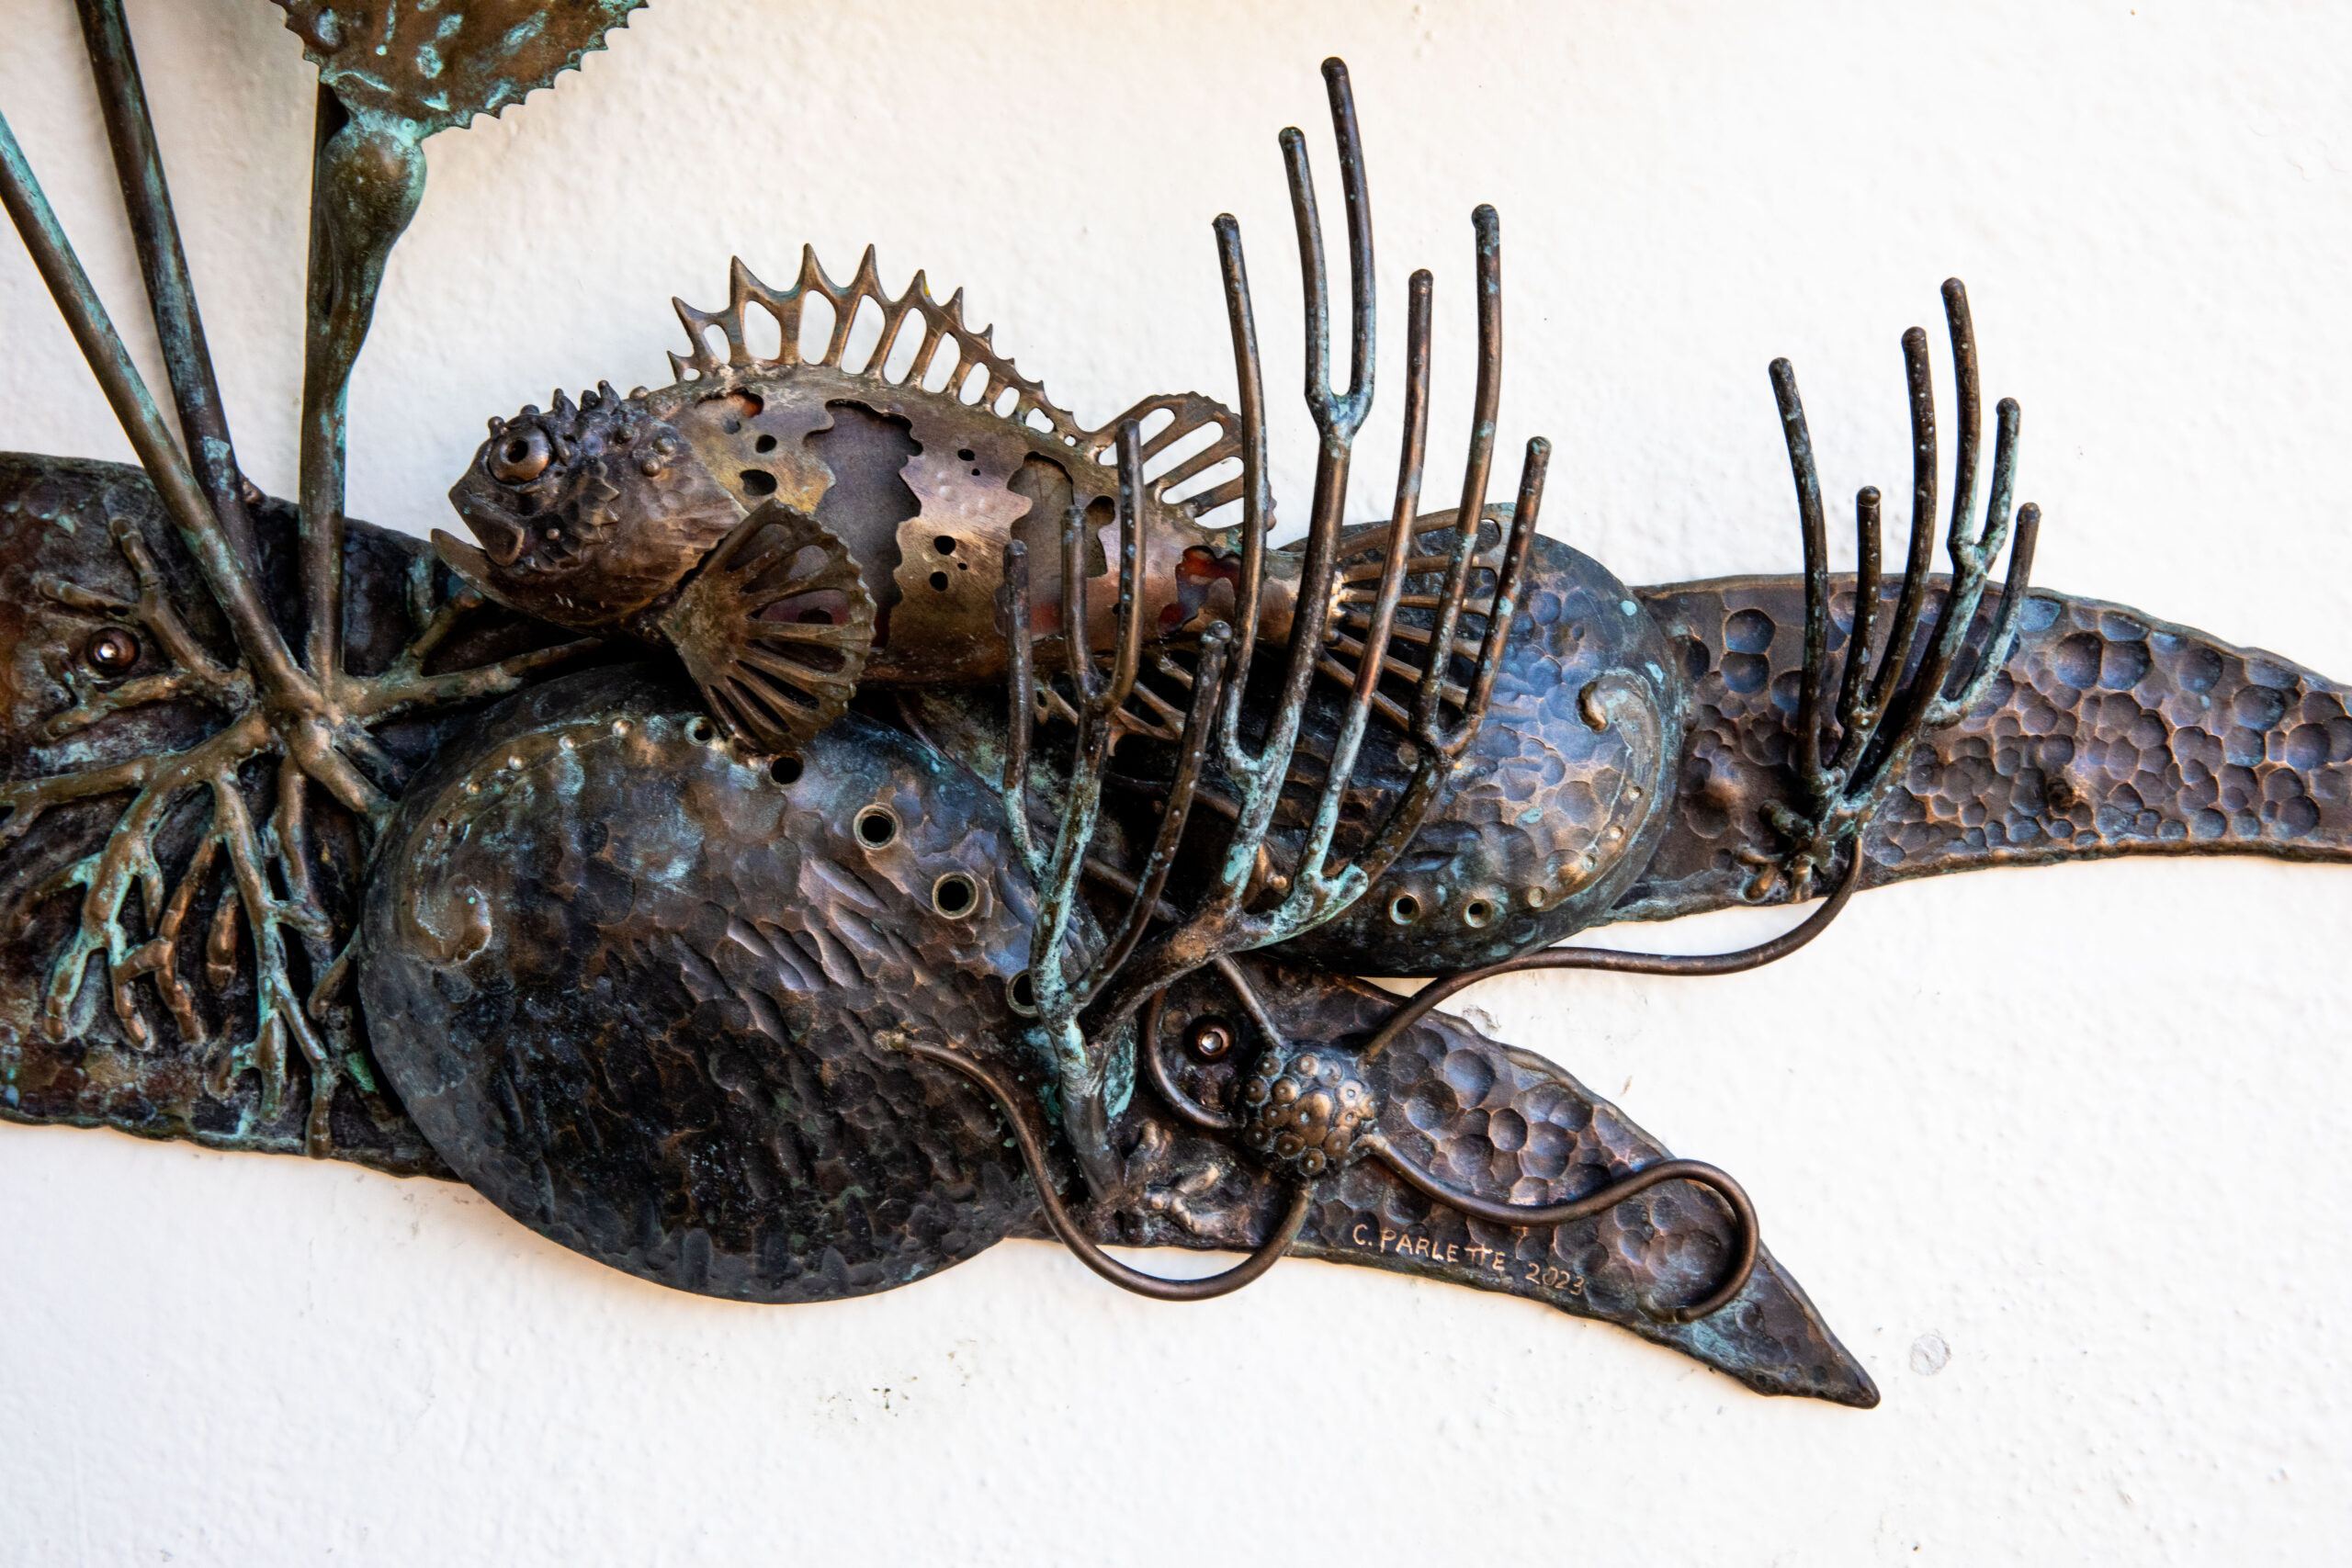 Hammered and welded bronze calico bass reef sculpture